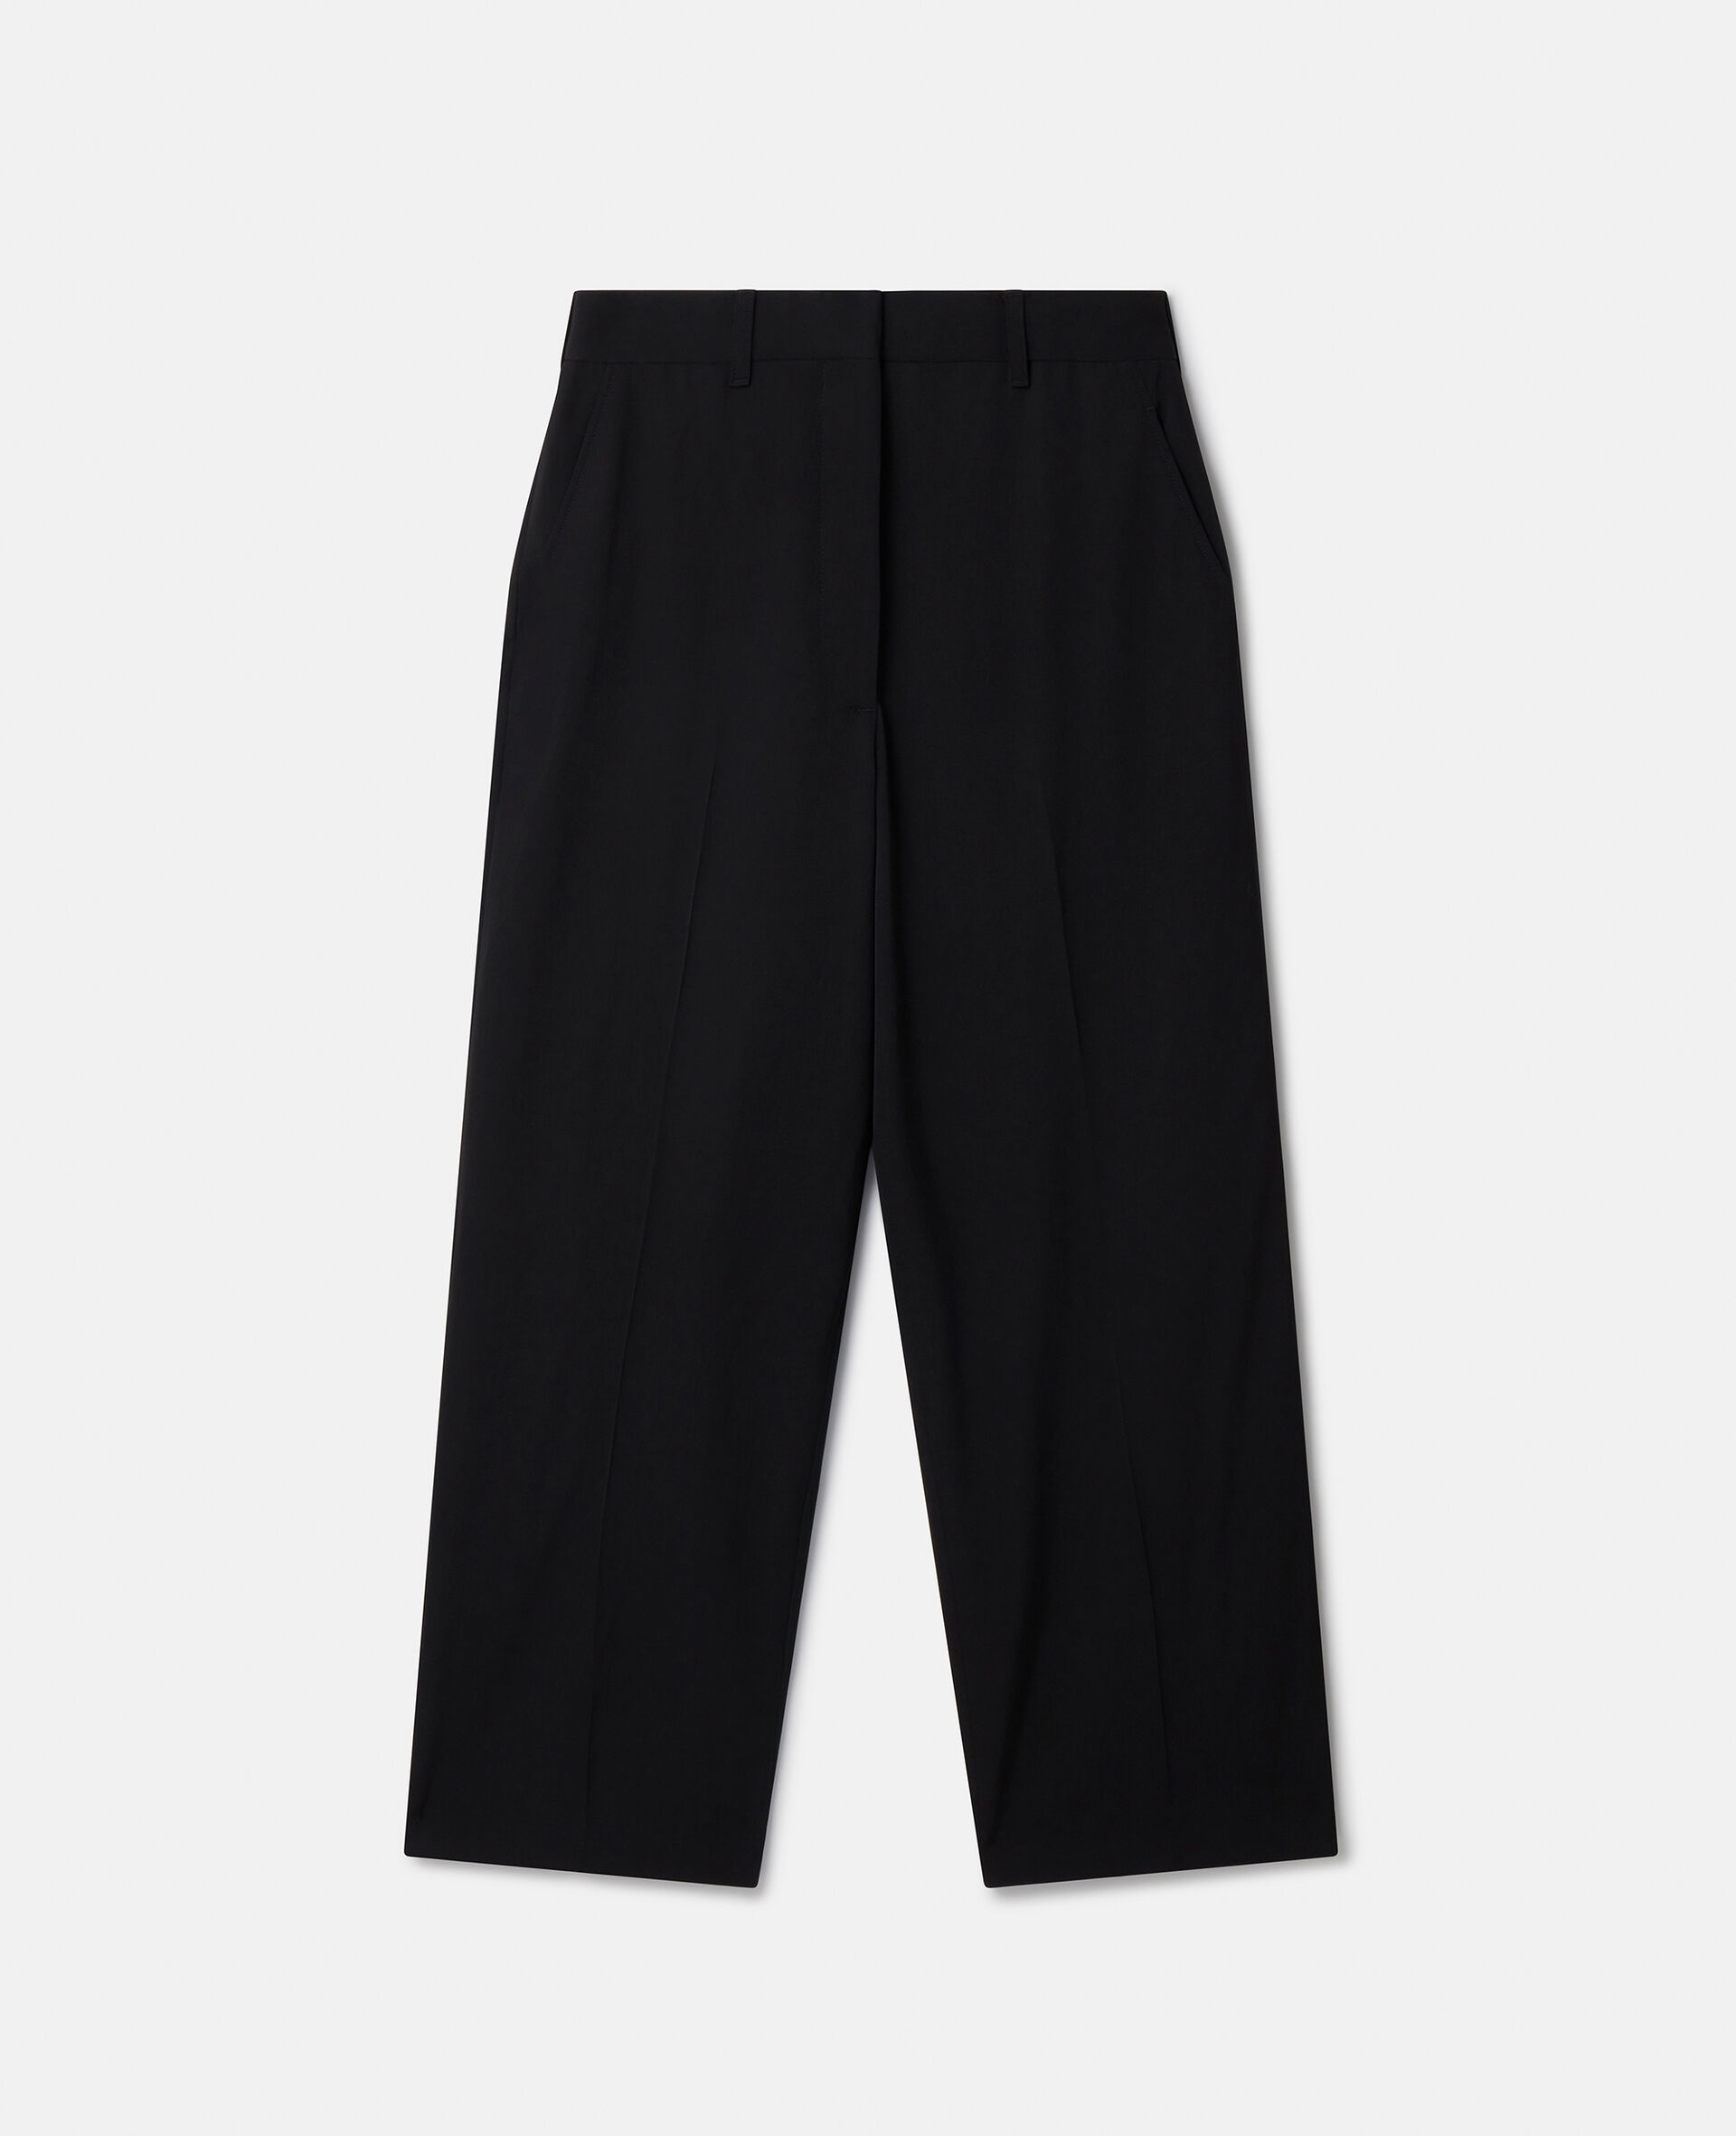 Cropped Tailored Wool Trousers-Black-large image number 0